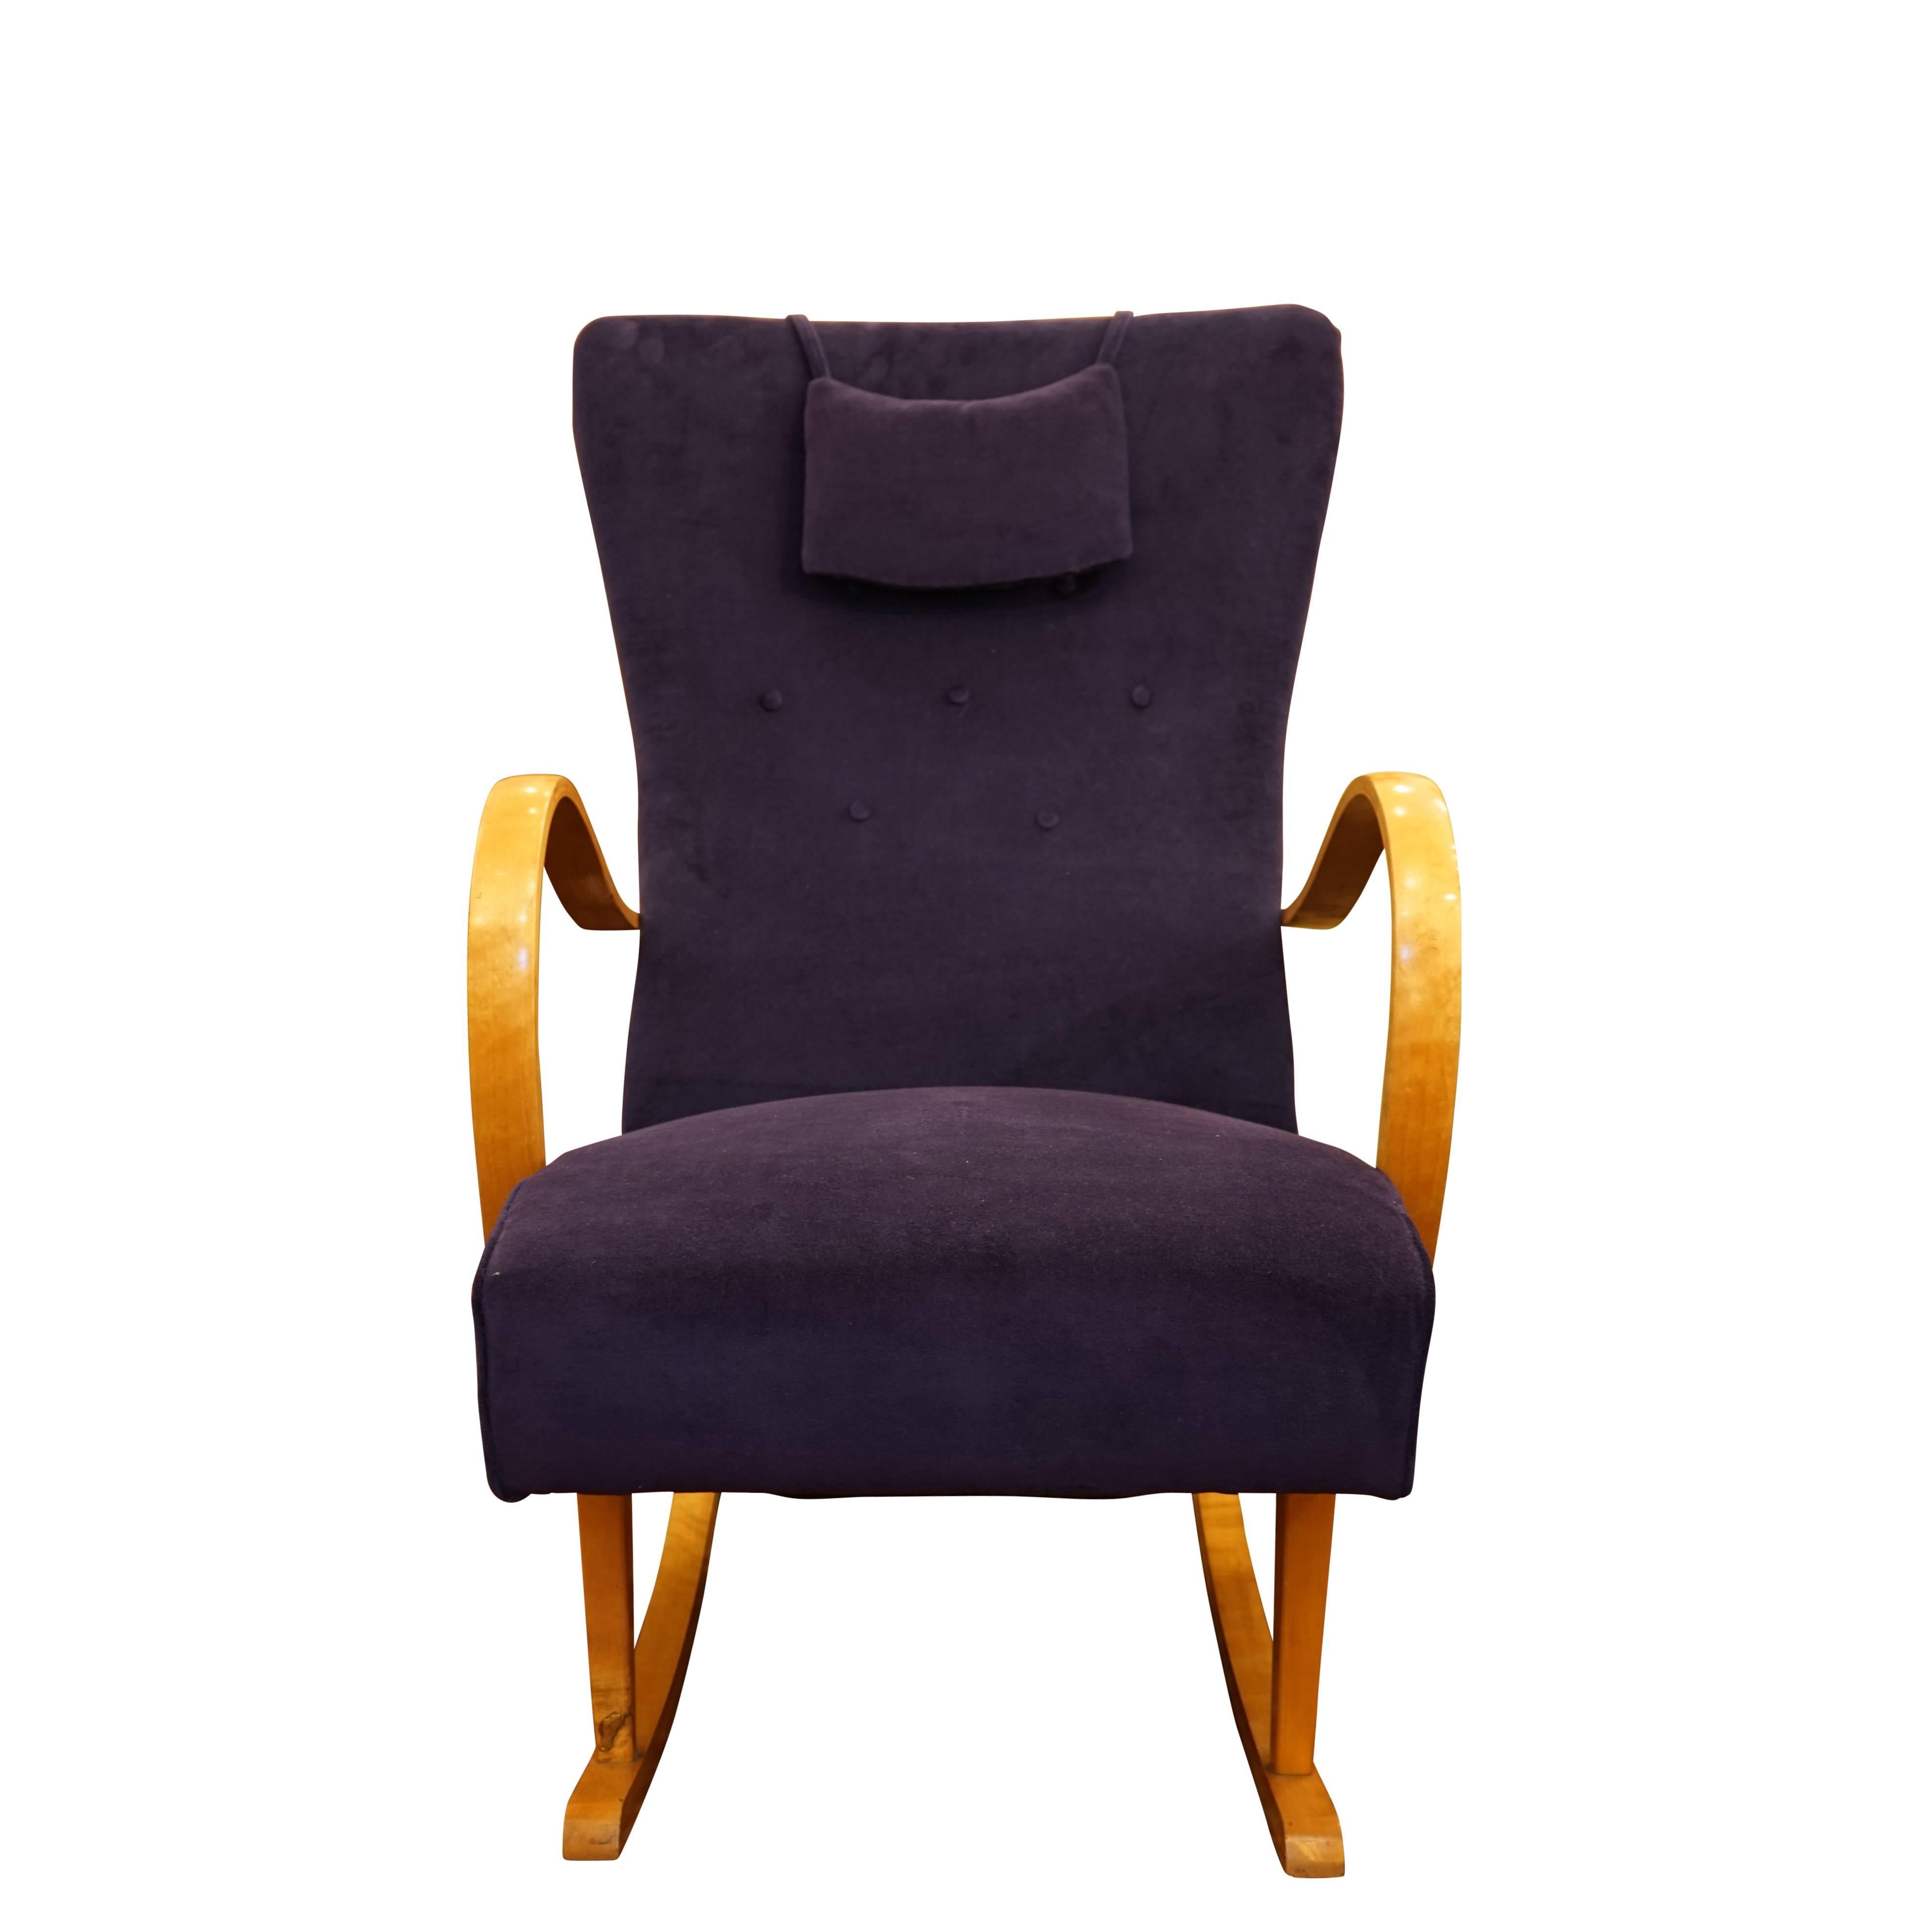 Crafted of solid birch and recently reupholstered in a lush purple velvet, the sprung seat, contoured back and attached head pillow offer exceptional comfort.